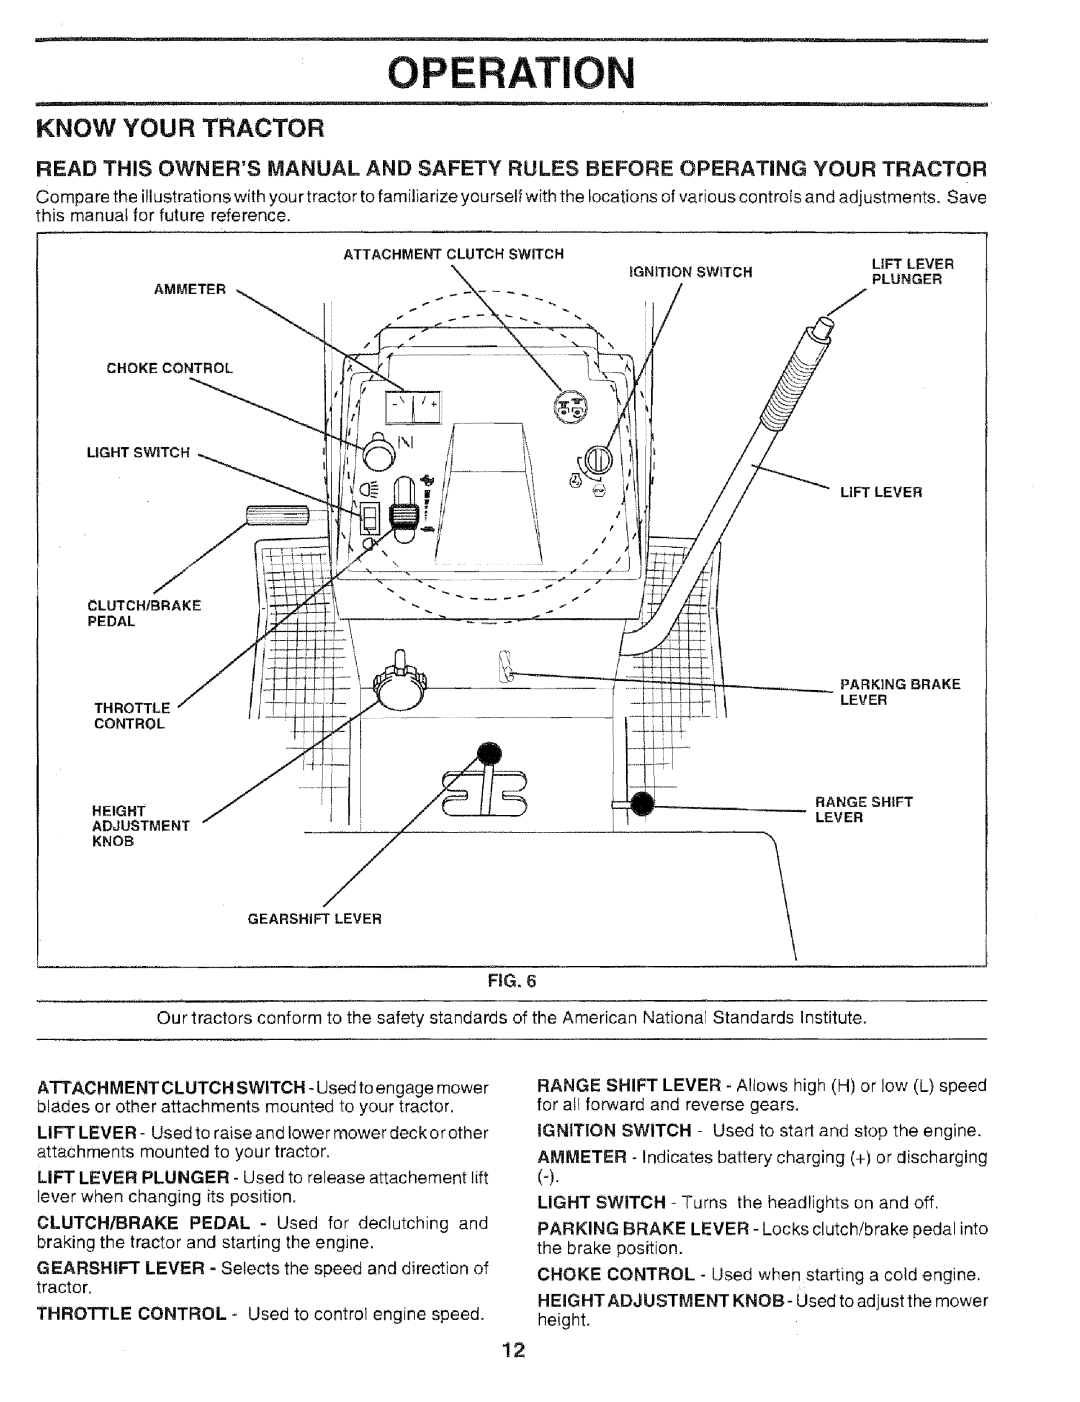 Sears 917.25051 manual Operation, Know Your Tractor 